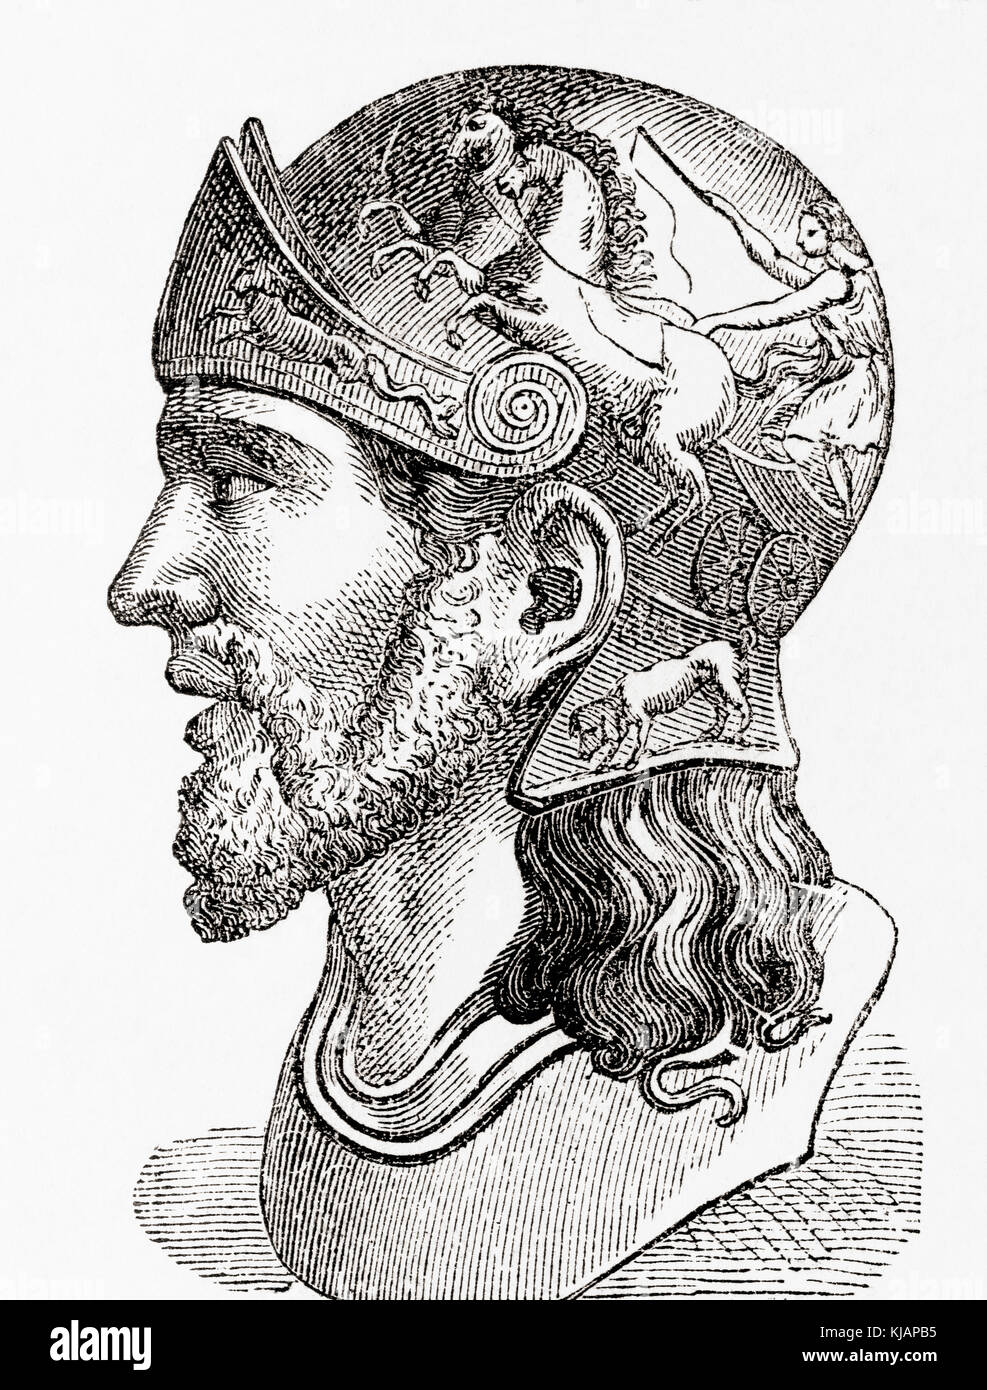 Masinissa or Masensen, c.238 – 148 BC, also spelled Massinissa and Massena. First King of Numidia. From Ward and Lock's Illustrated History of the World, published c.1882. Stock Photo